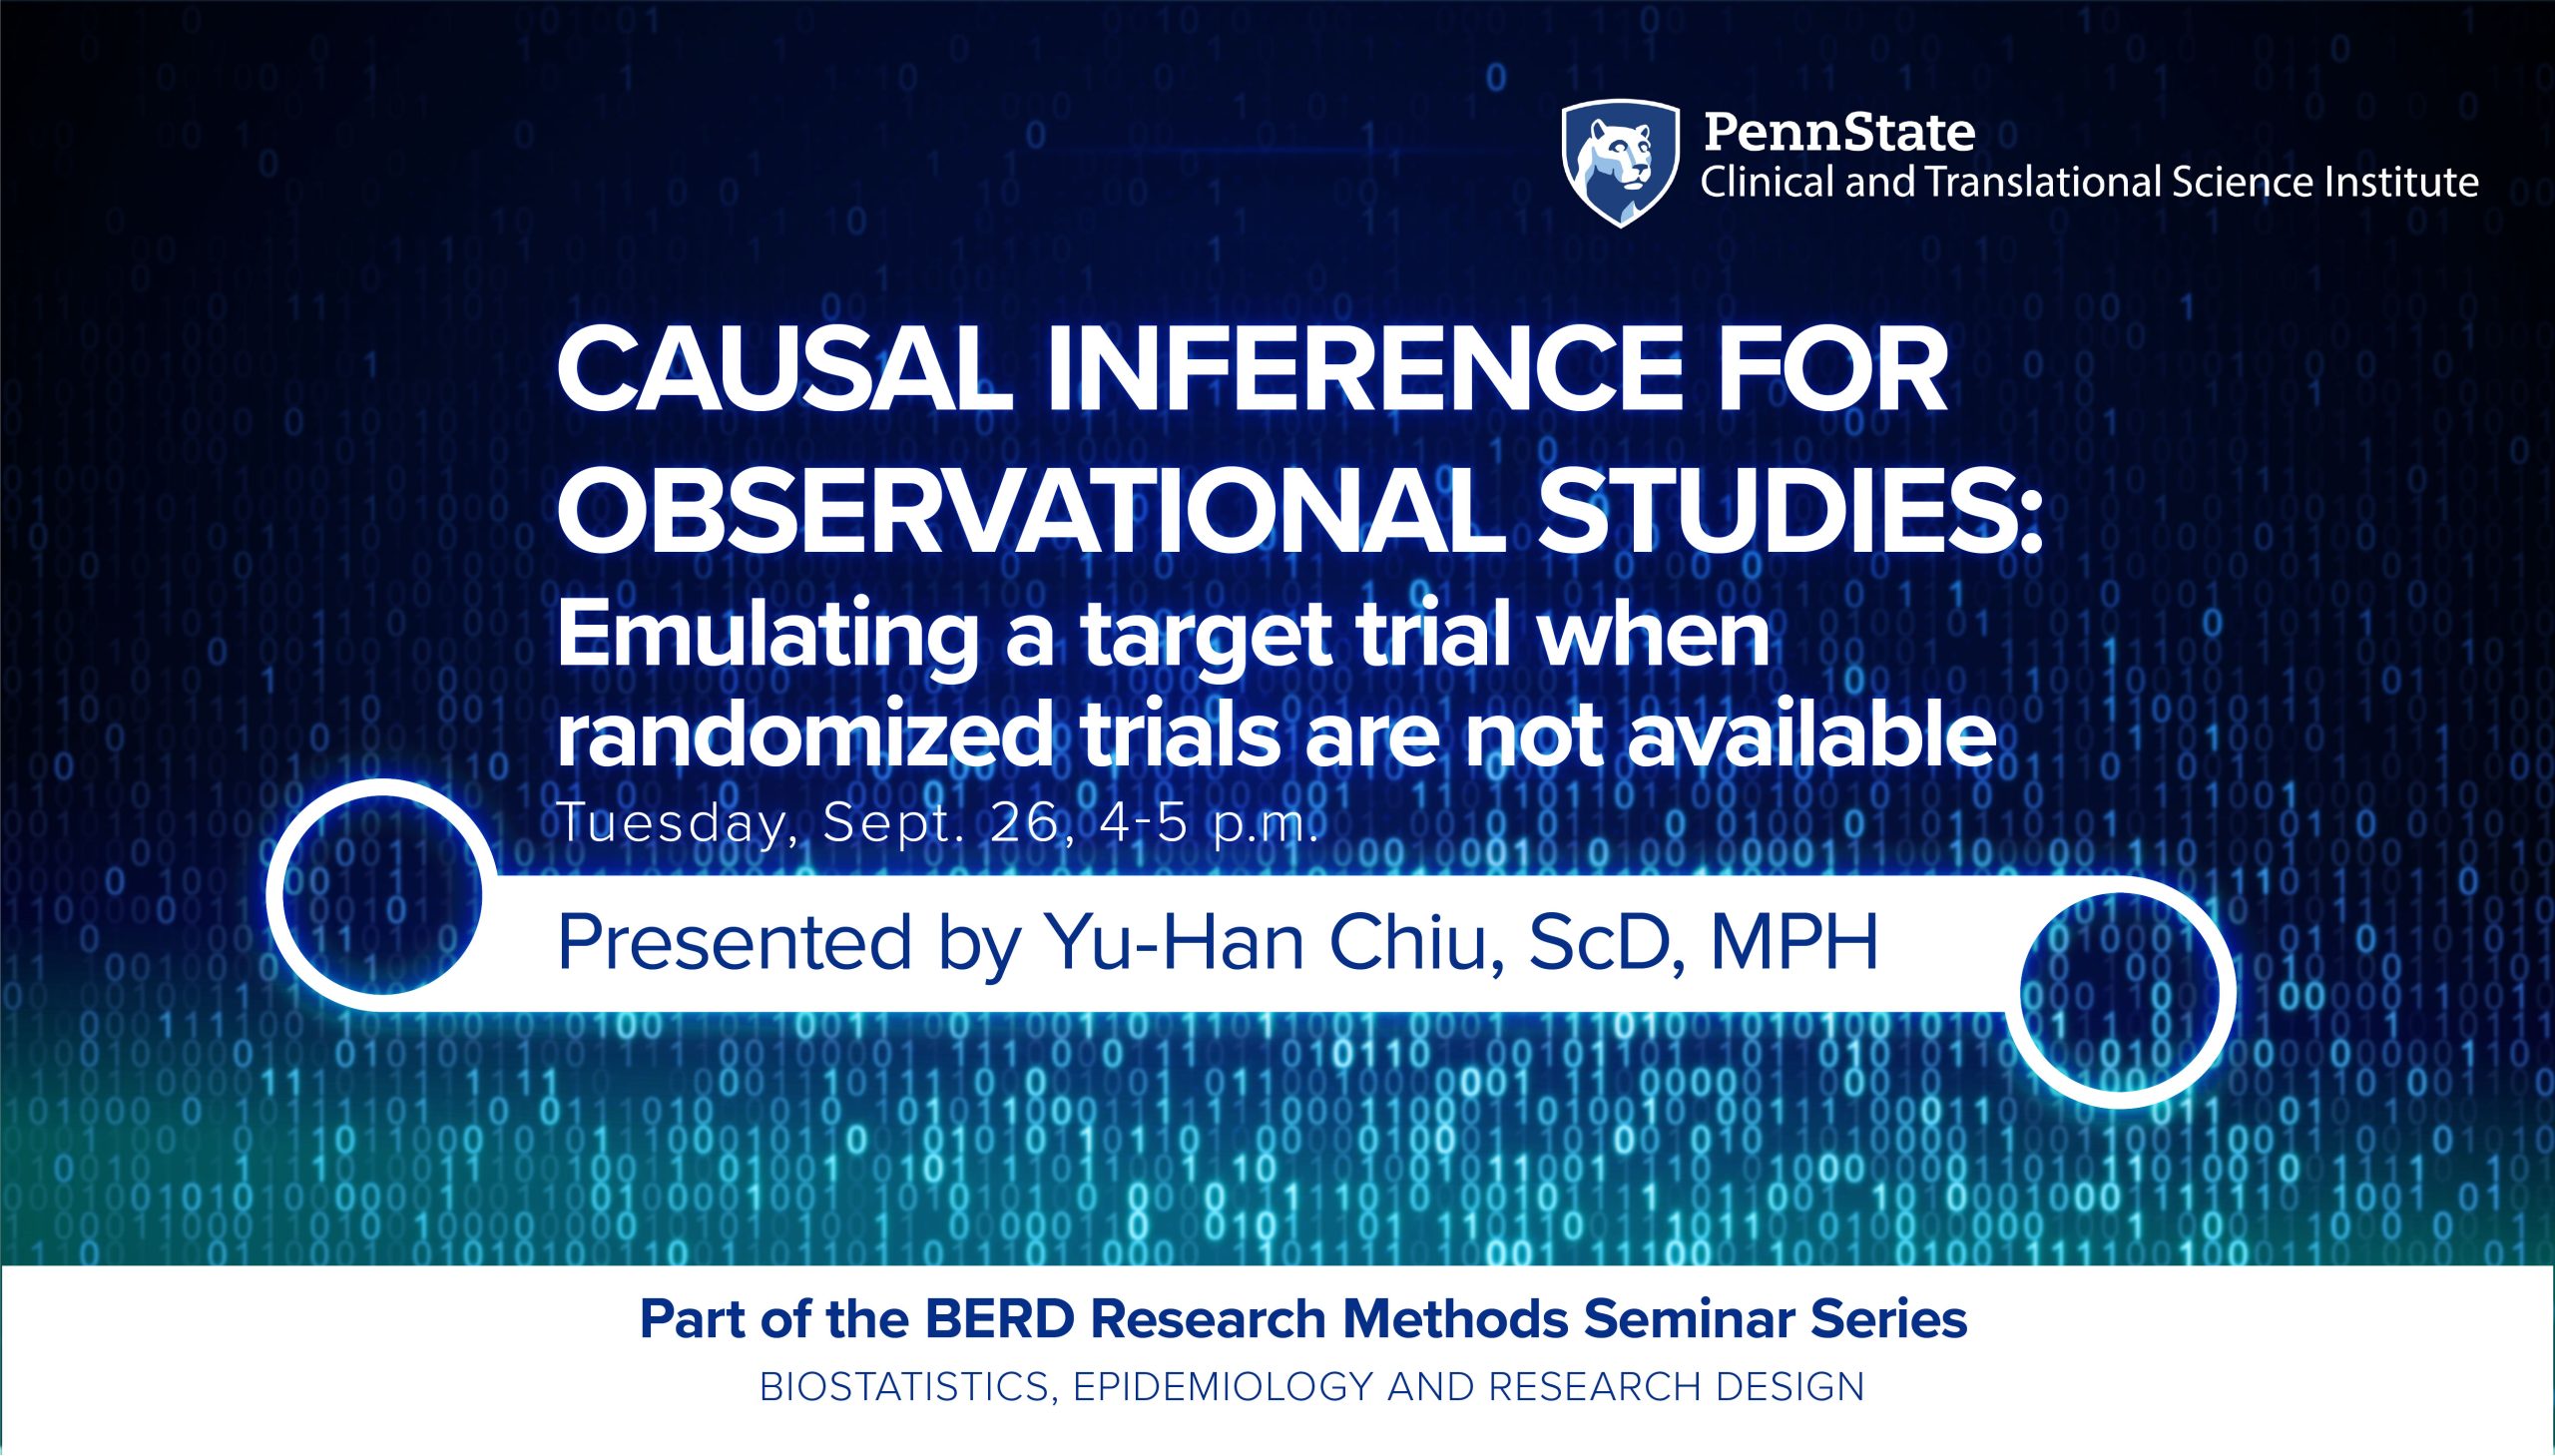 Causal inference for observational studies: Emulating a target trial when randomized trials are not available